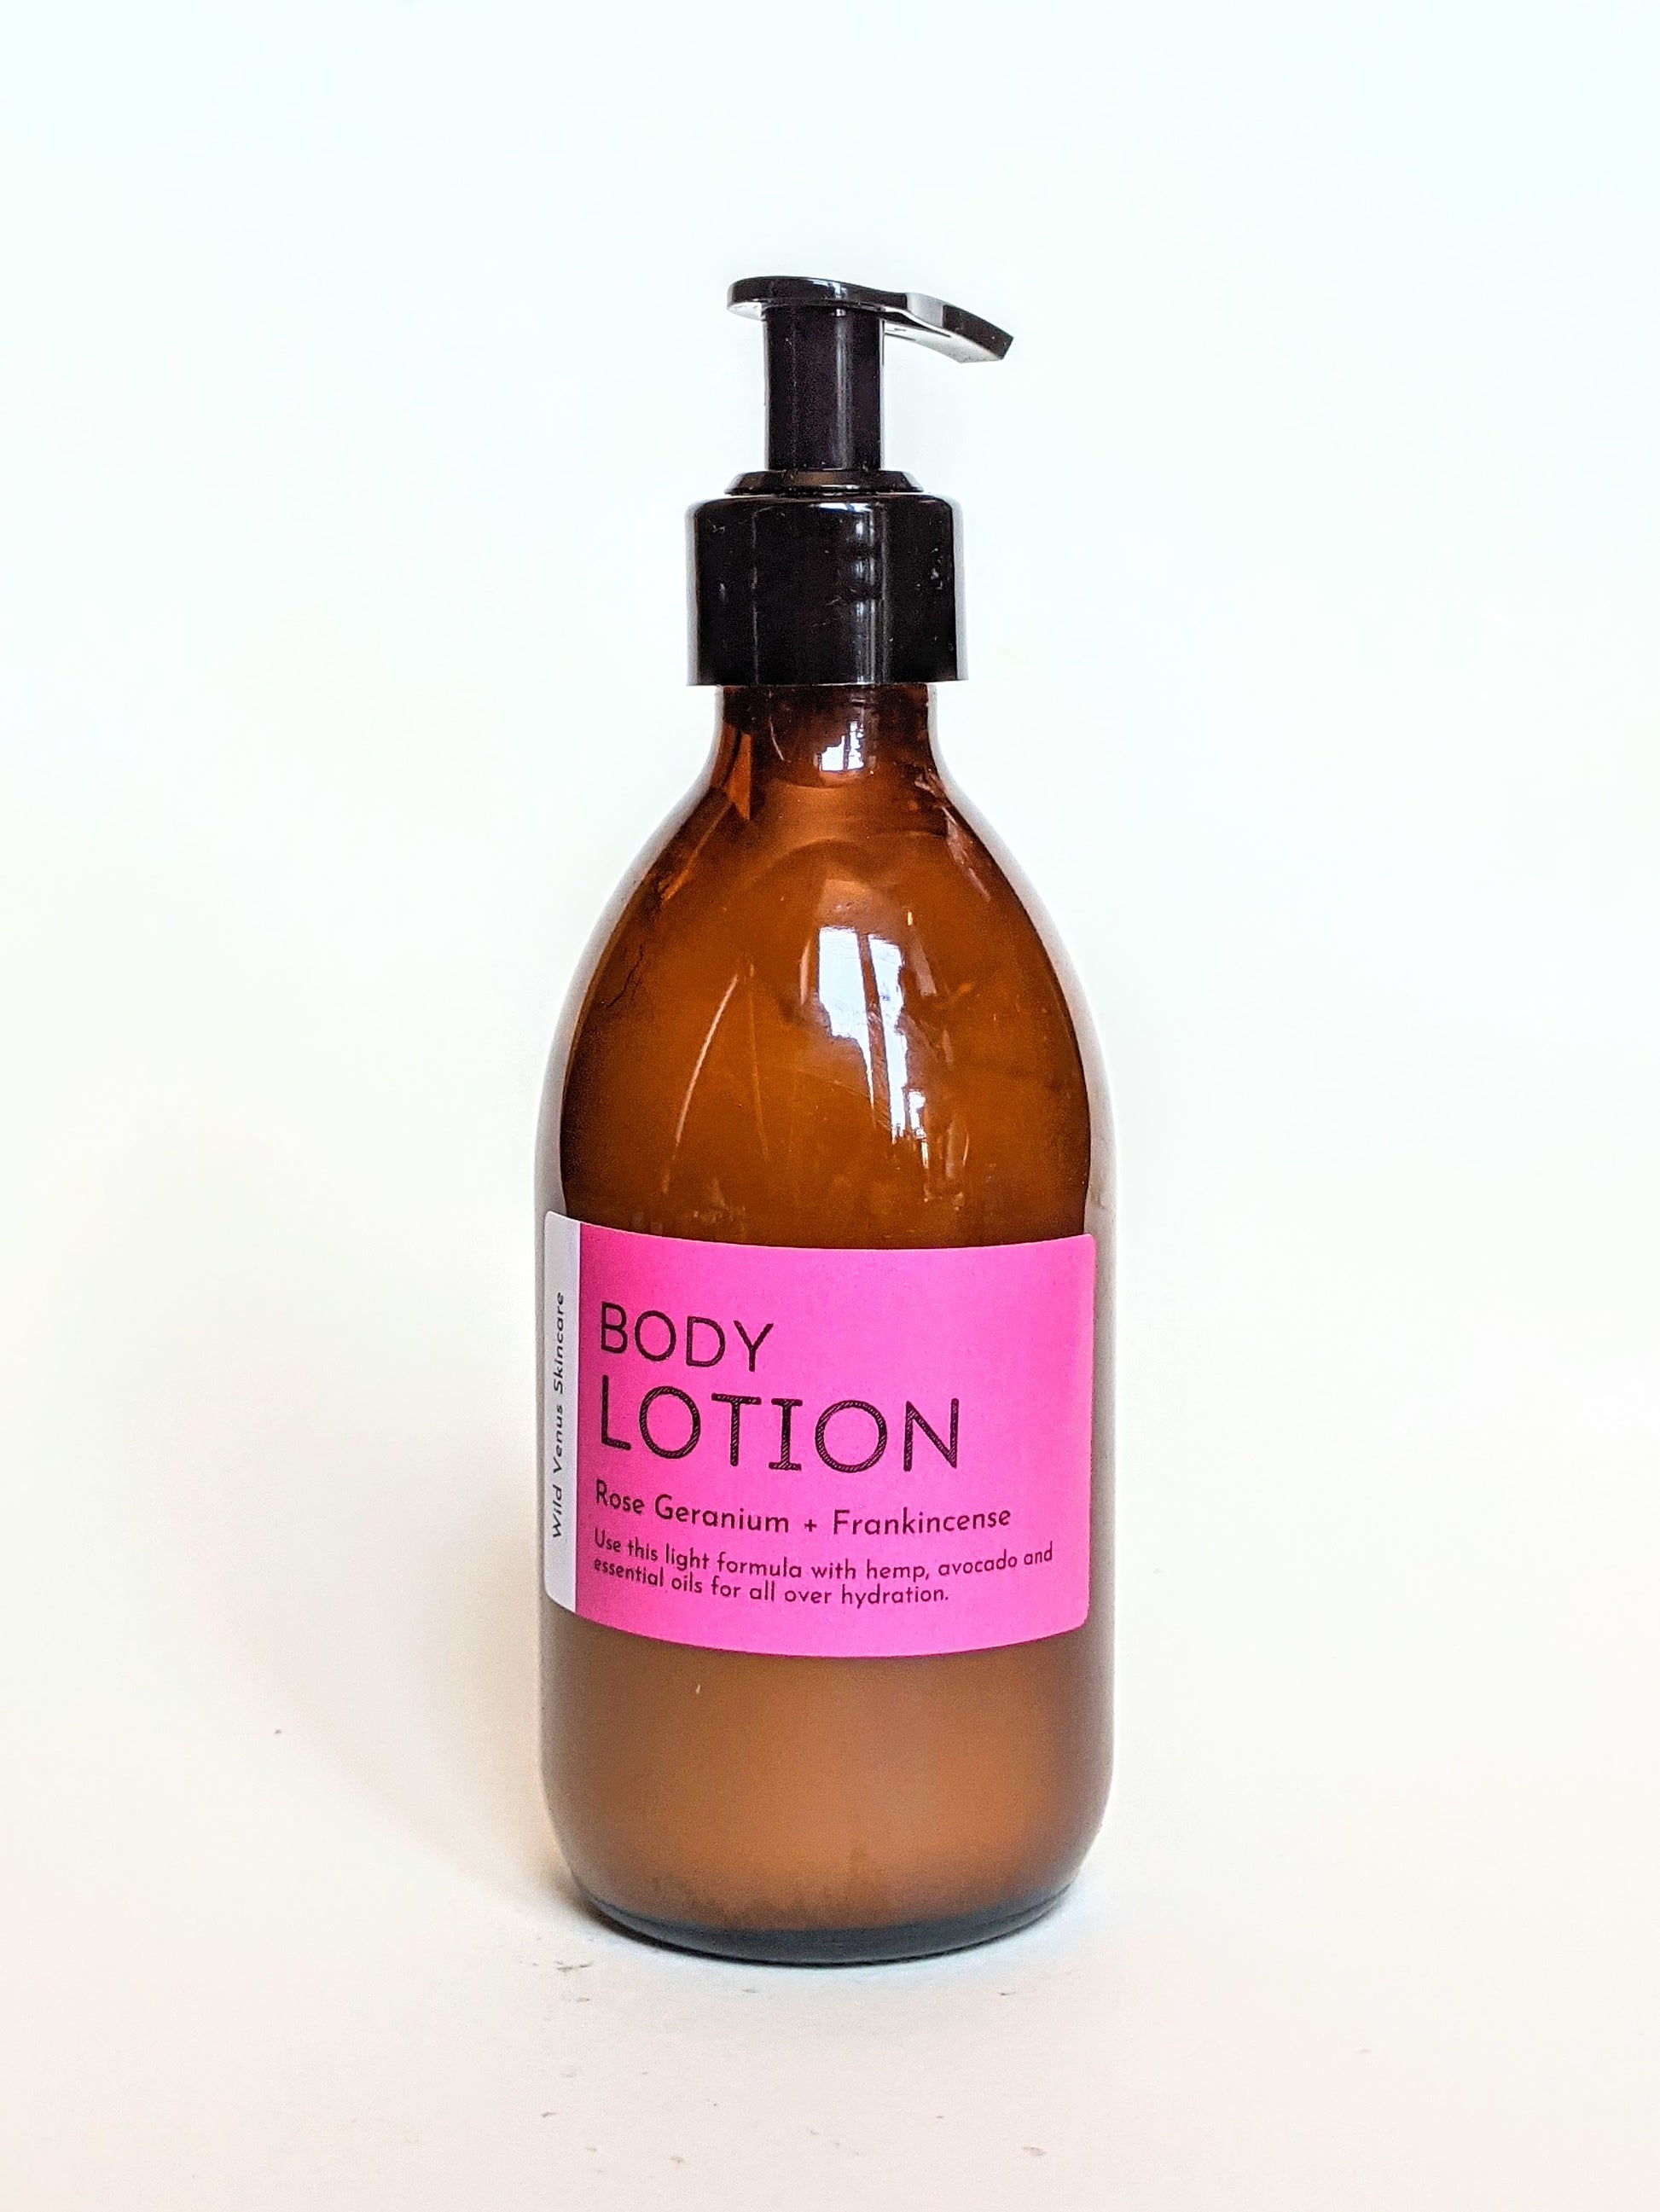 A bottle of rose geranium and frankincense hand and body lotion